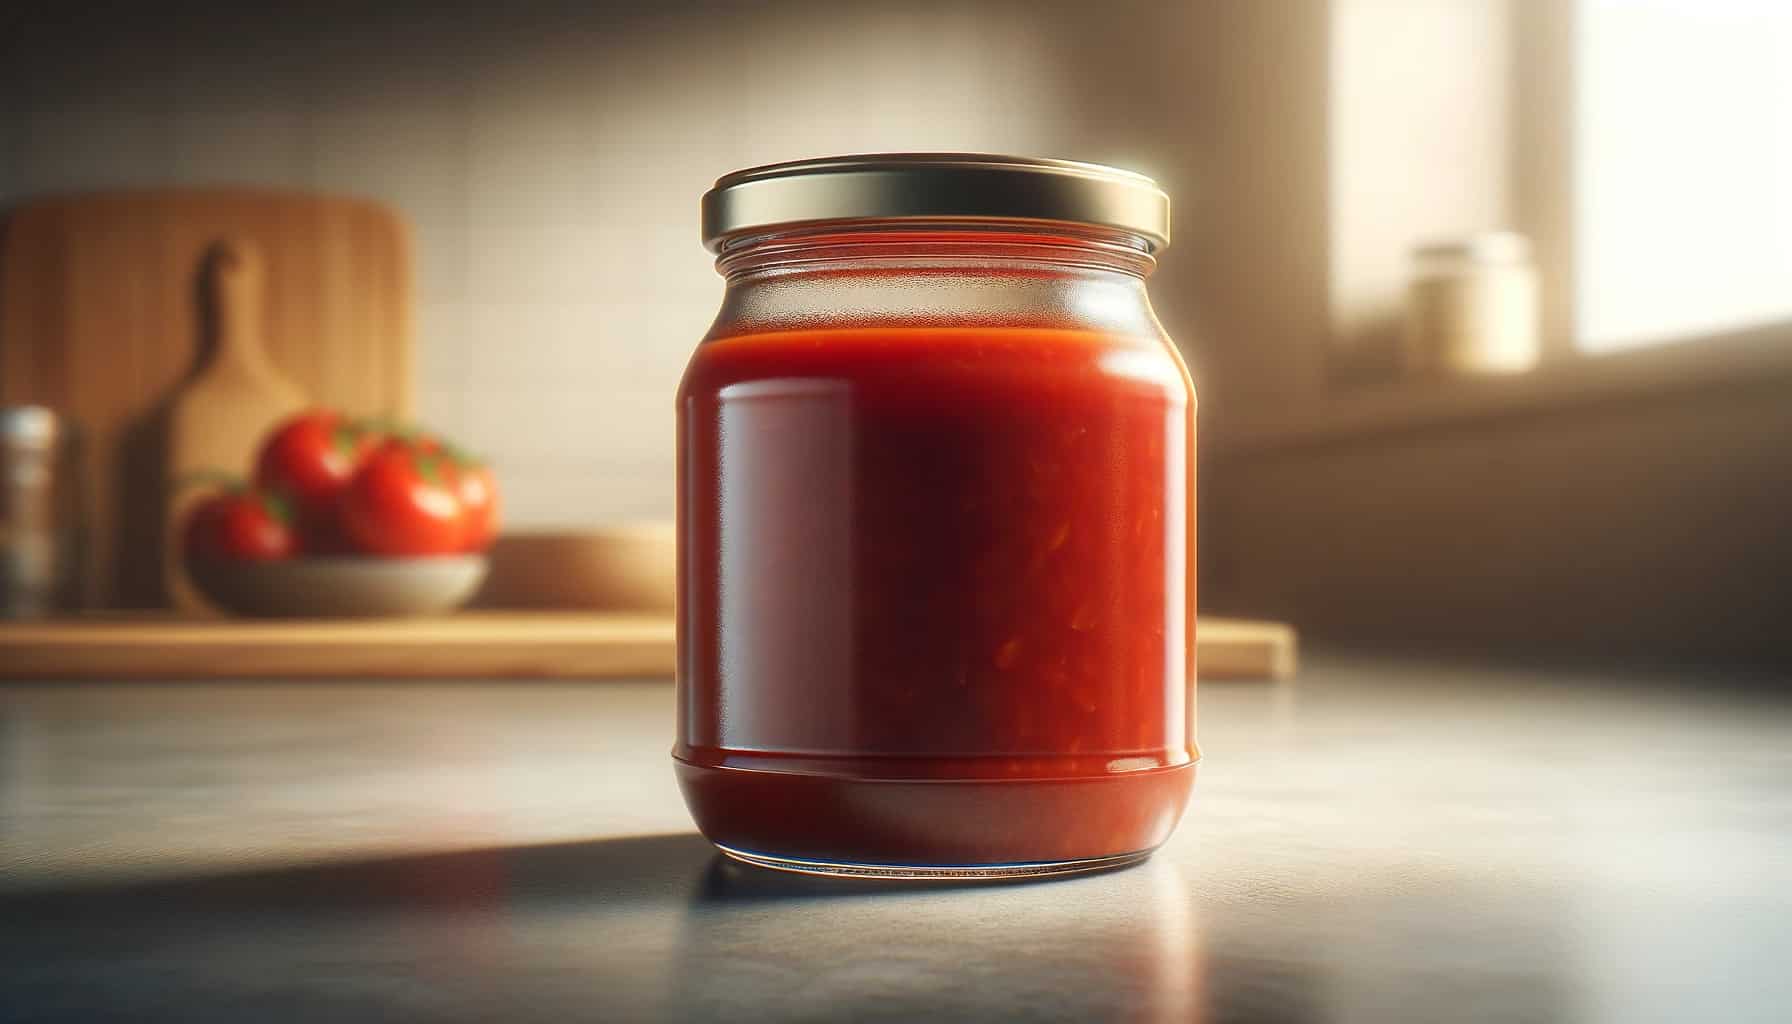 Tomato sauce in a clear glass jar